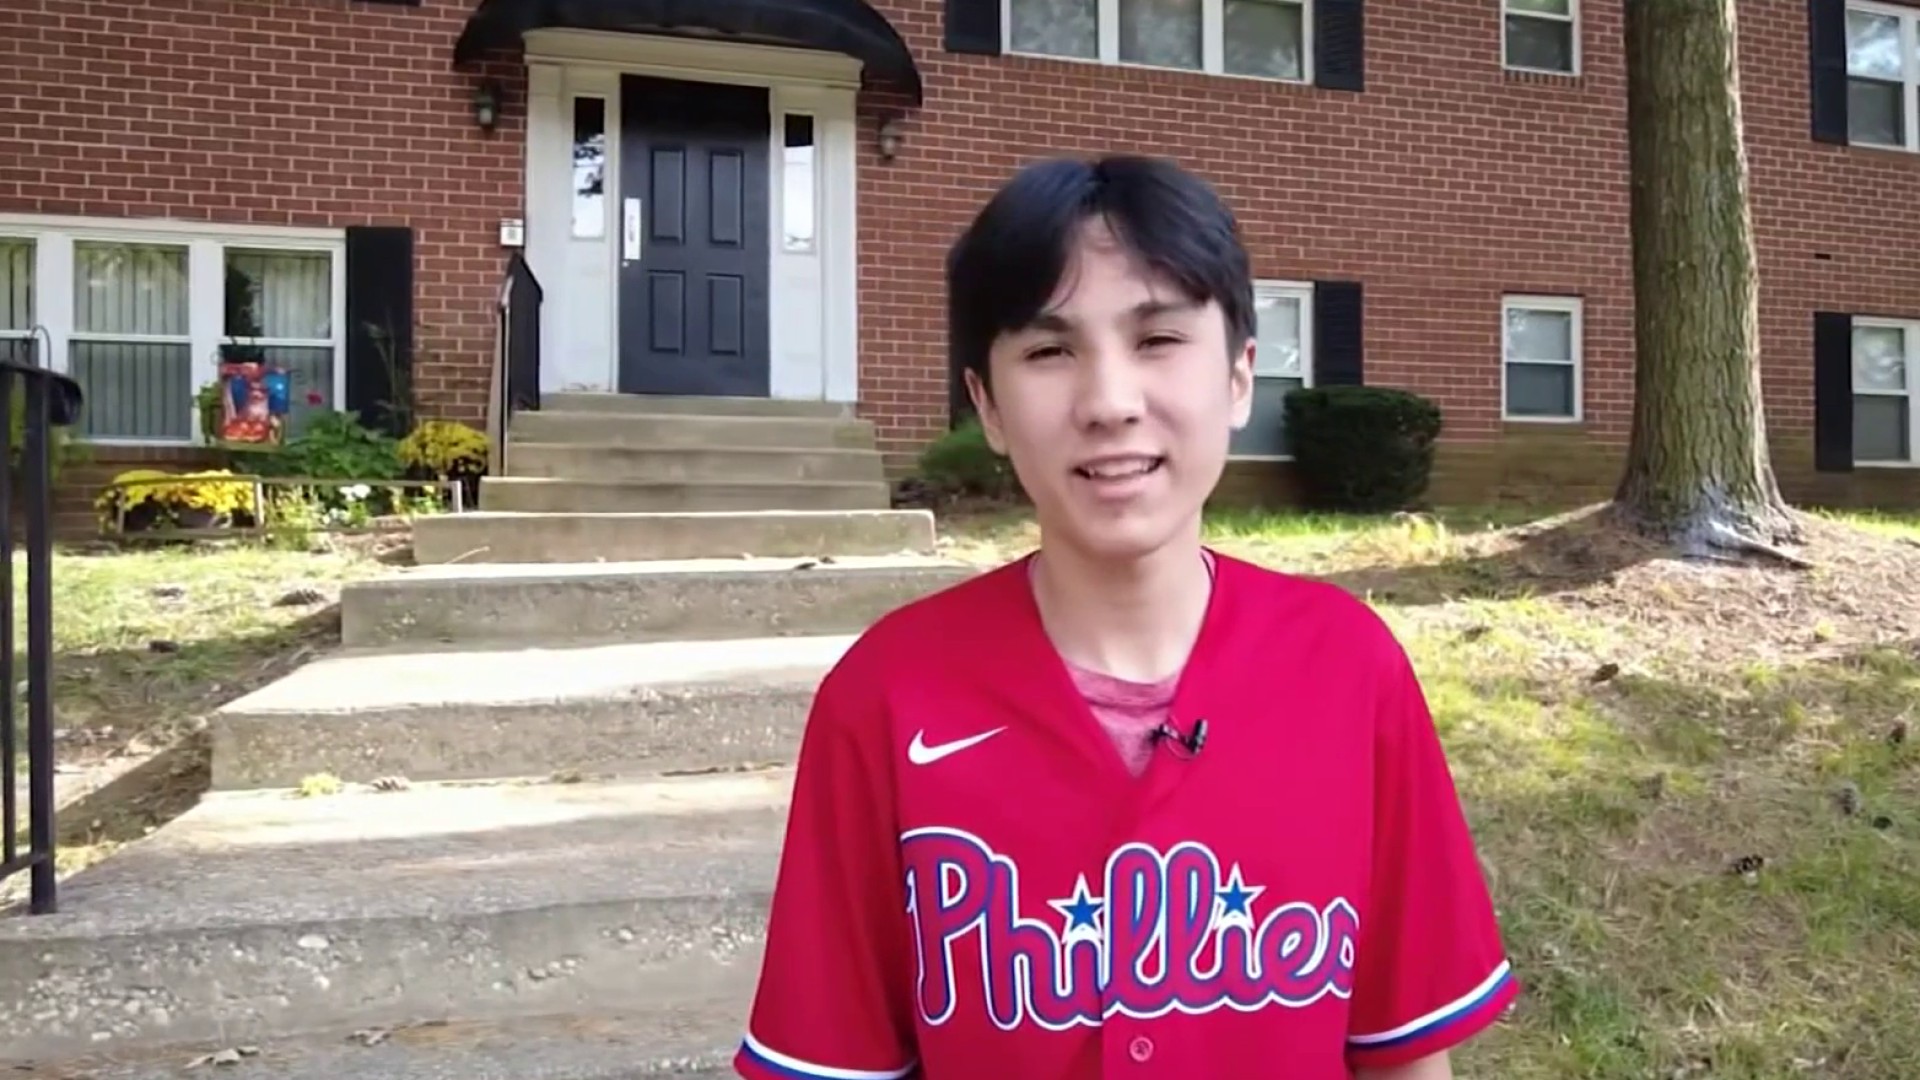 Phillies Fans Take 16-Year-Old Boy Under Their Wing After Discovering Why  He Was Alone at Game – NBC10 Philadelphia